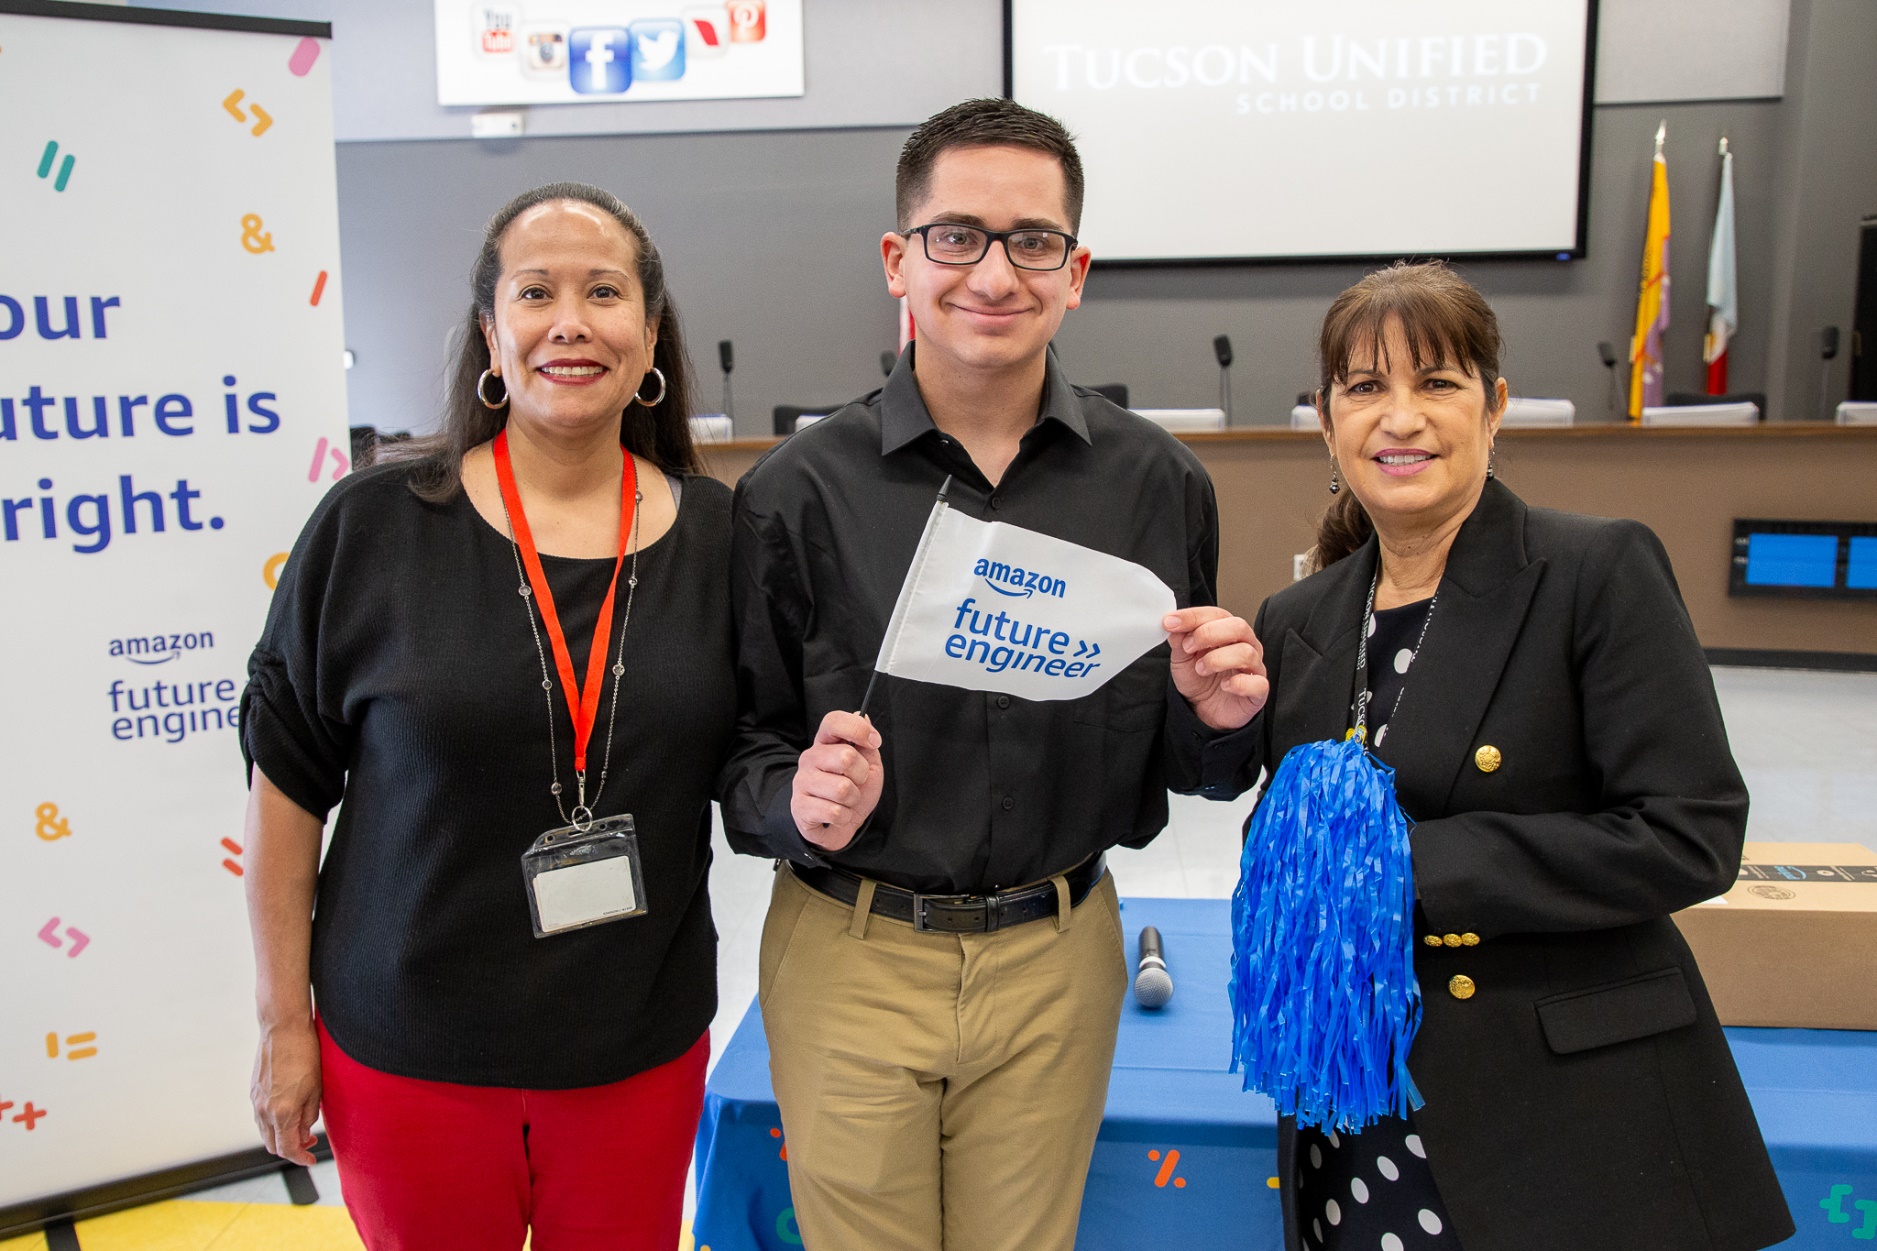 Ƶapp High senior Anthony Talavera smiles and poses with an Amazon Future Engineer flag and two TUSD staff members